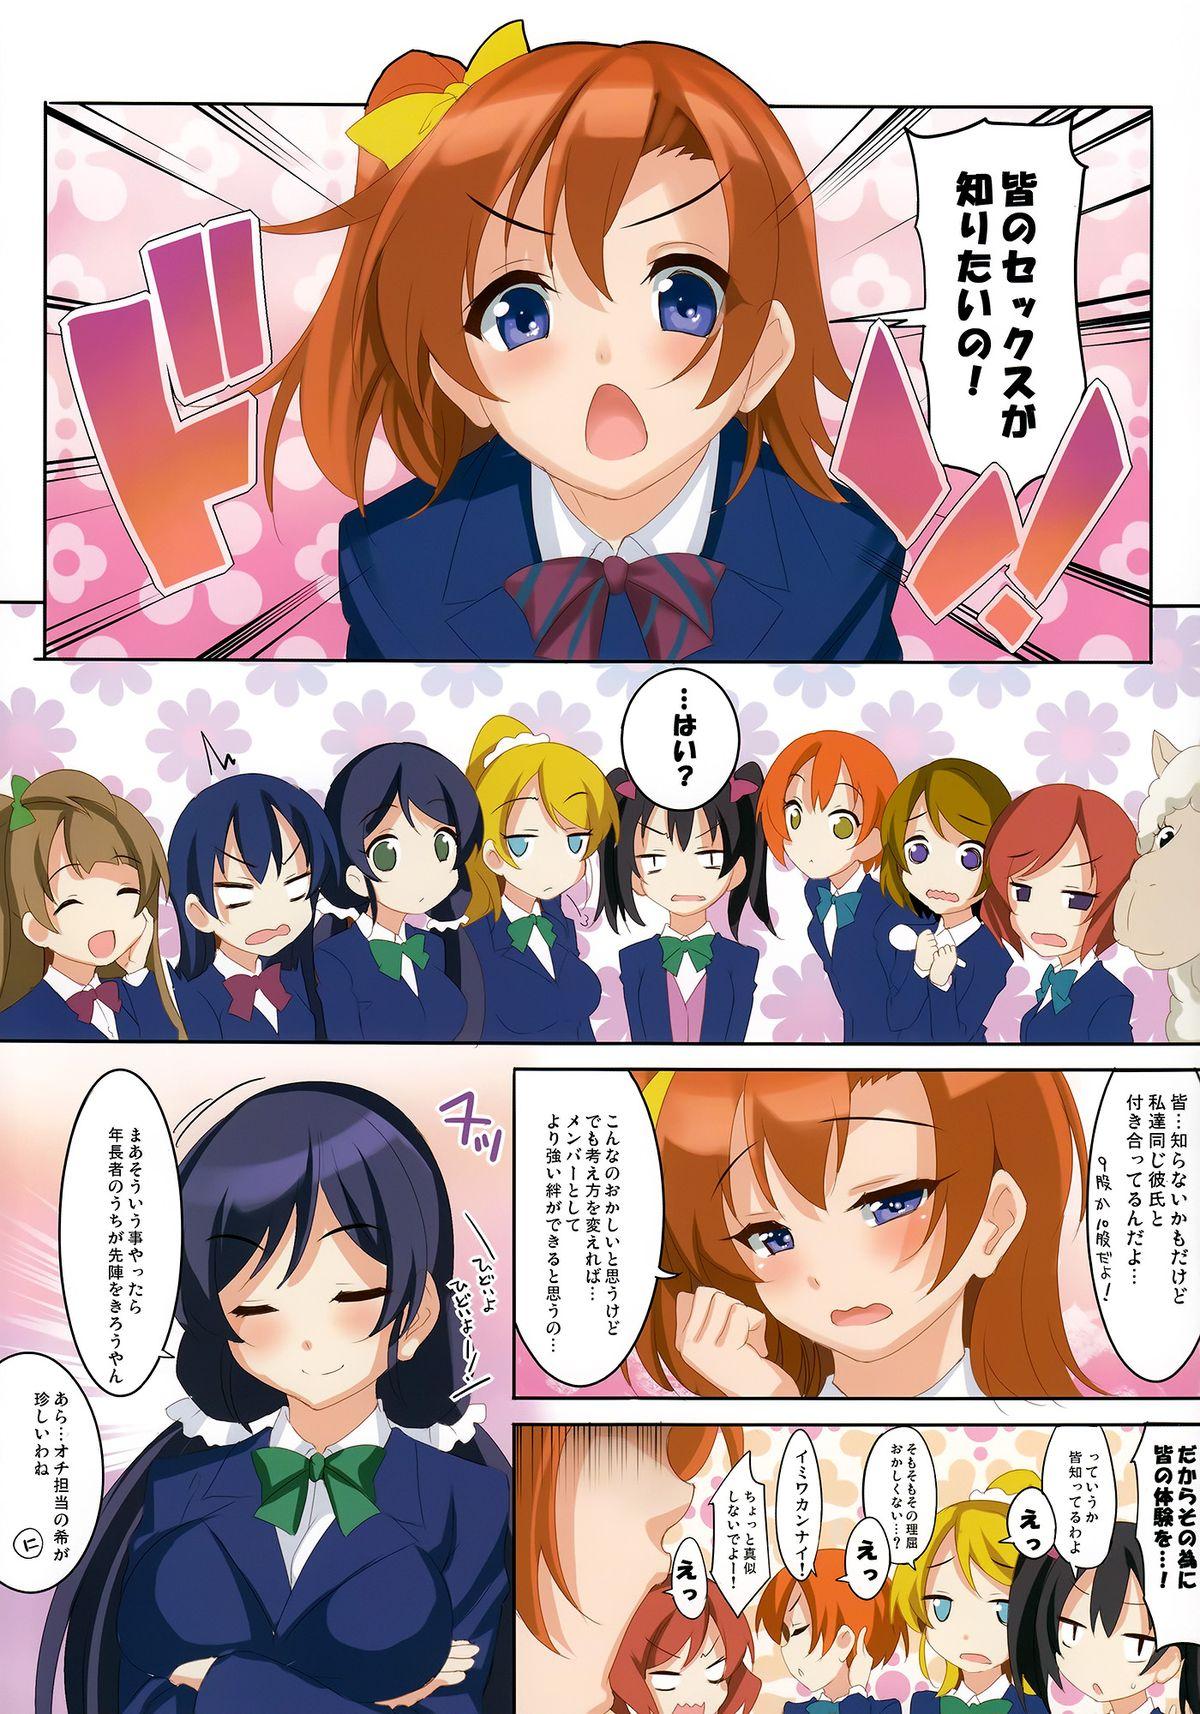 Spying CL-orz 41 - Love live Studs - Page 3